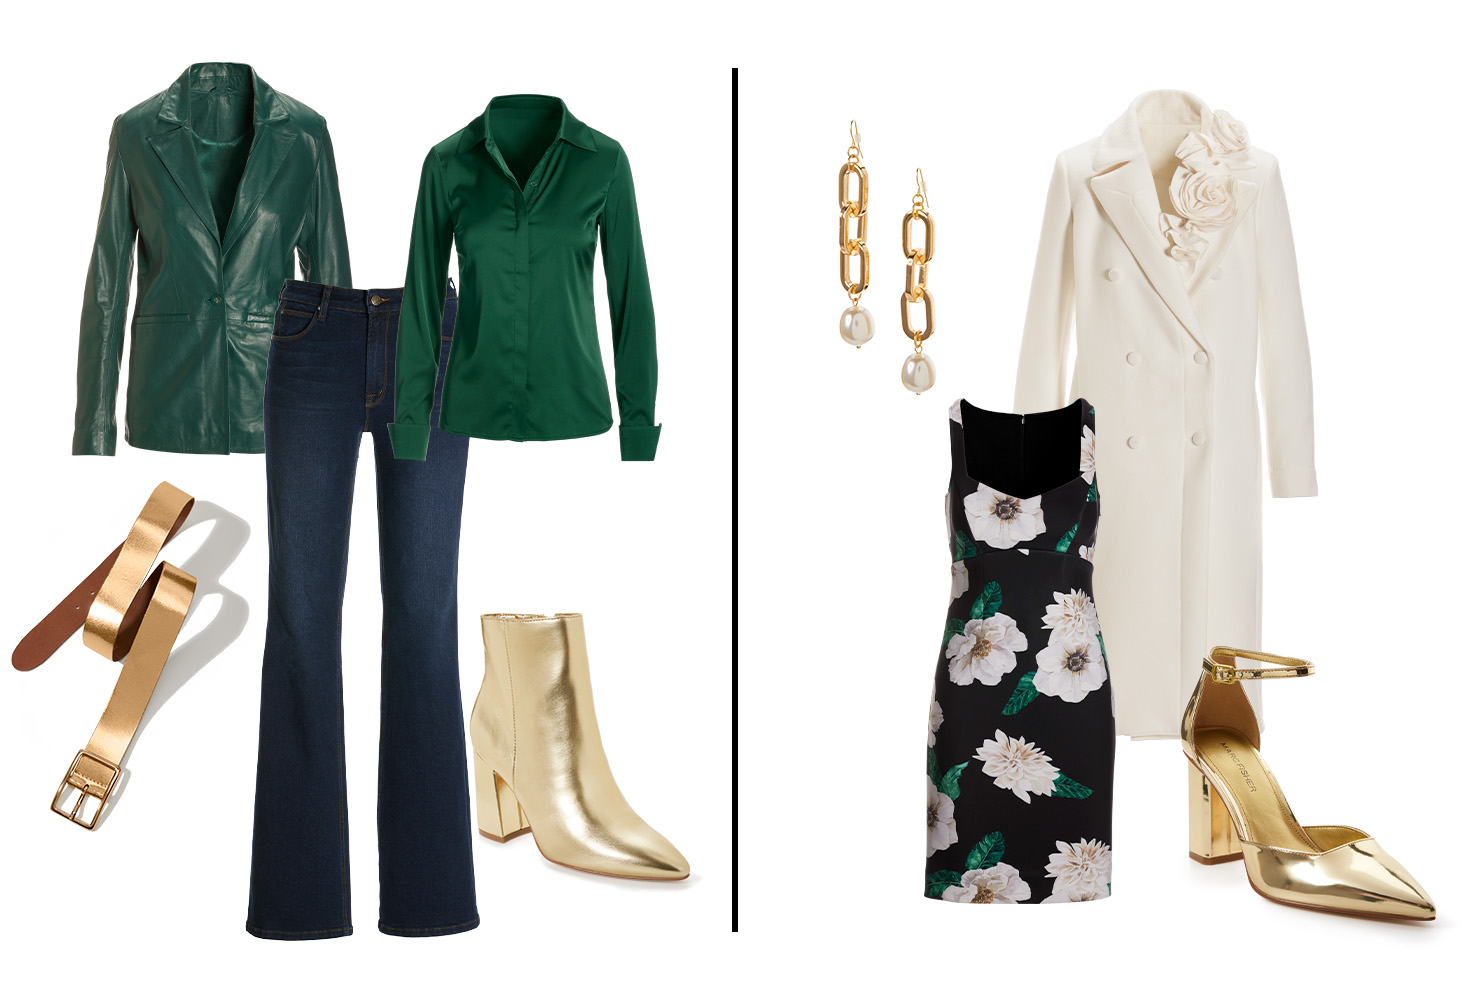 Photo has emerald leather blazer, emerald sophia button up, rinse monterey bootcut jeans, gold metallic belt and gold metallic square toe booties. Second outfit suggestion has winter white overcoat, floral print dress, gold earrings and gold metallic heels.